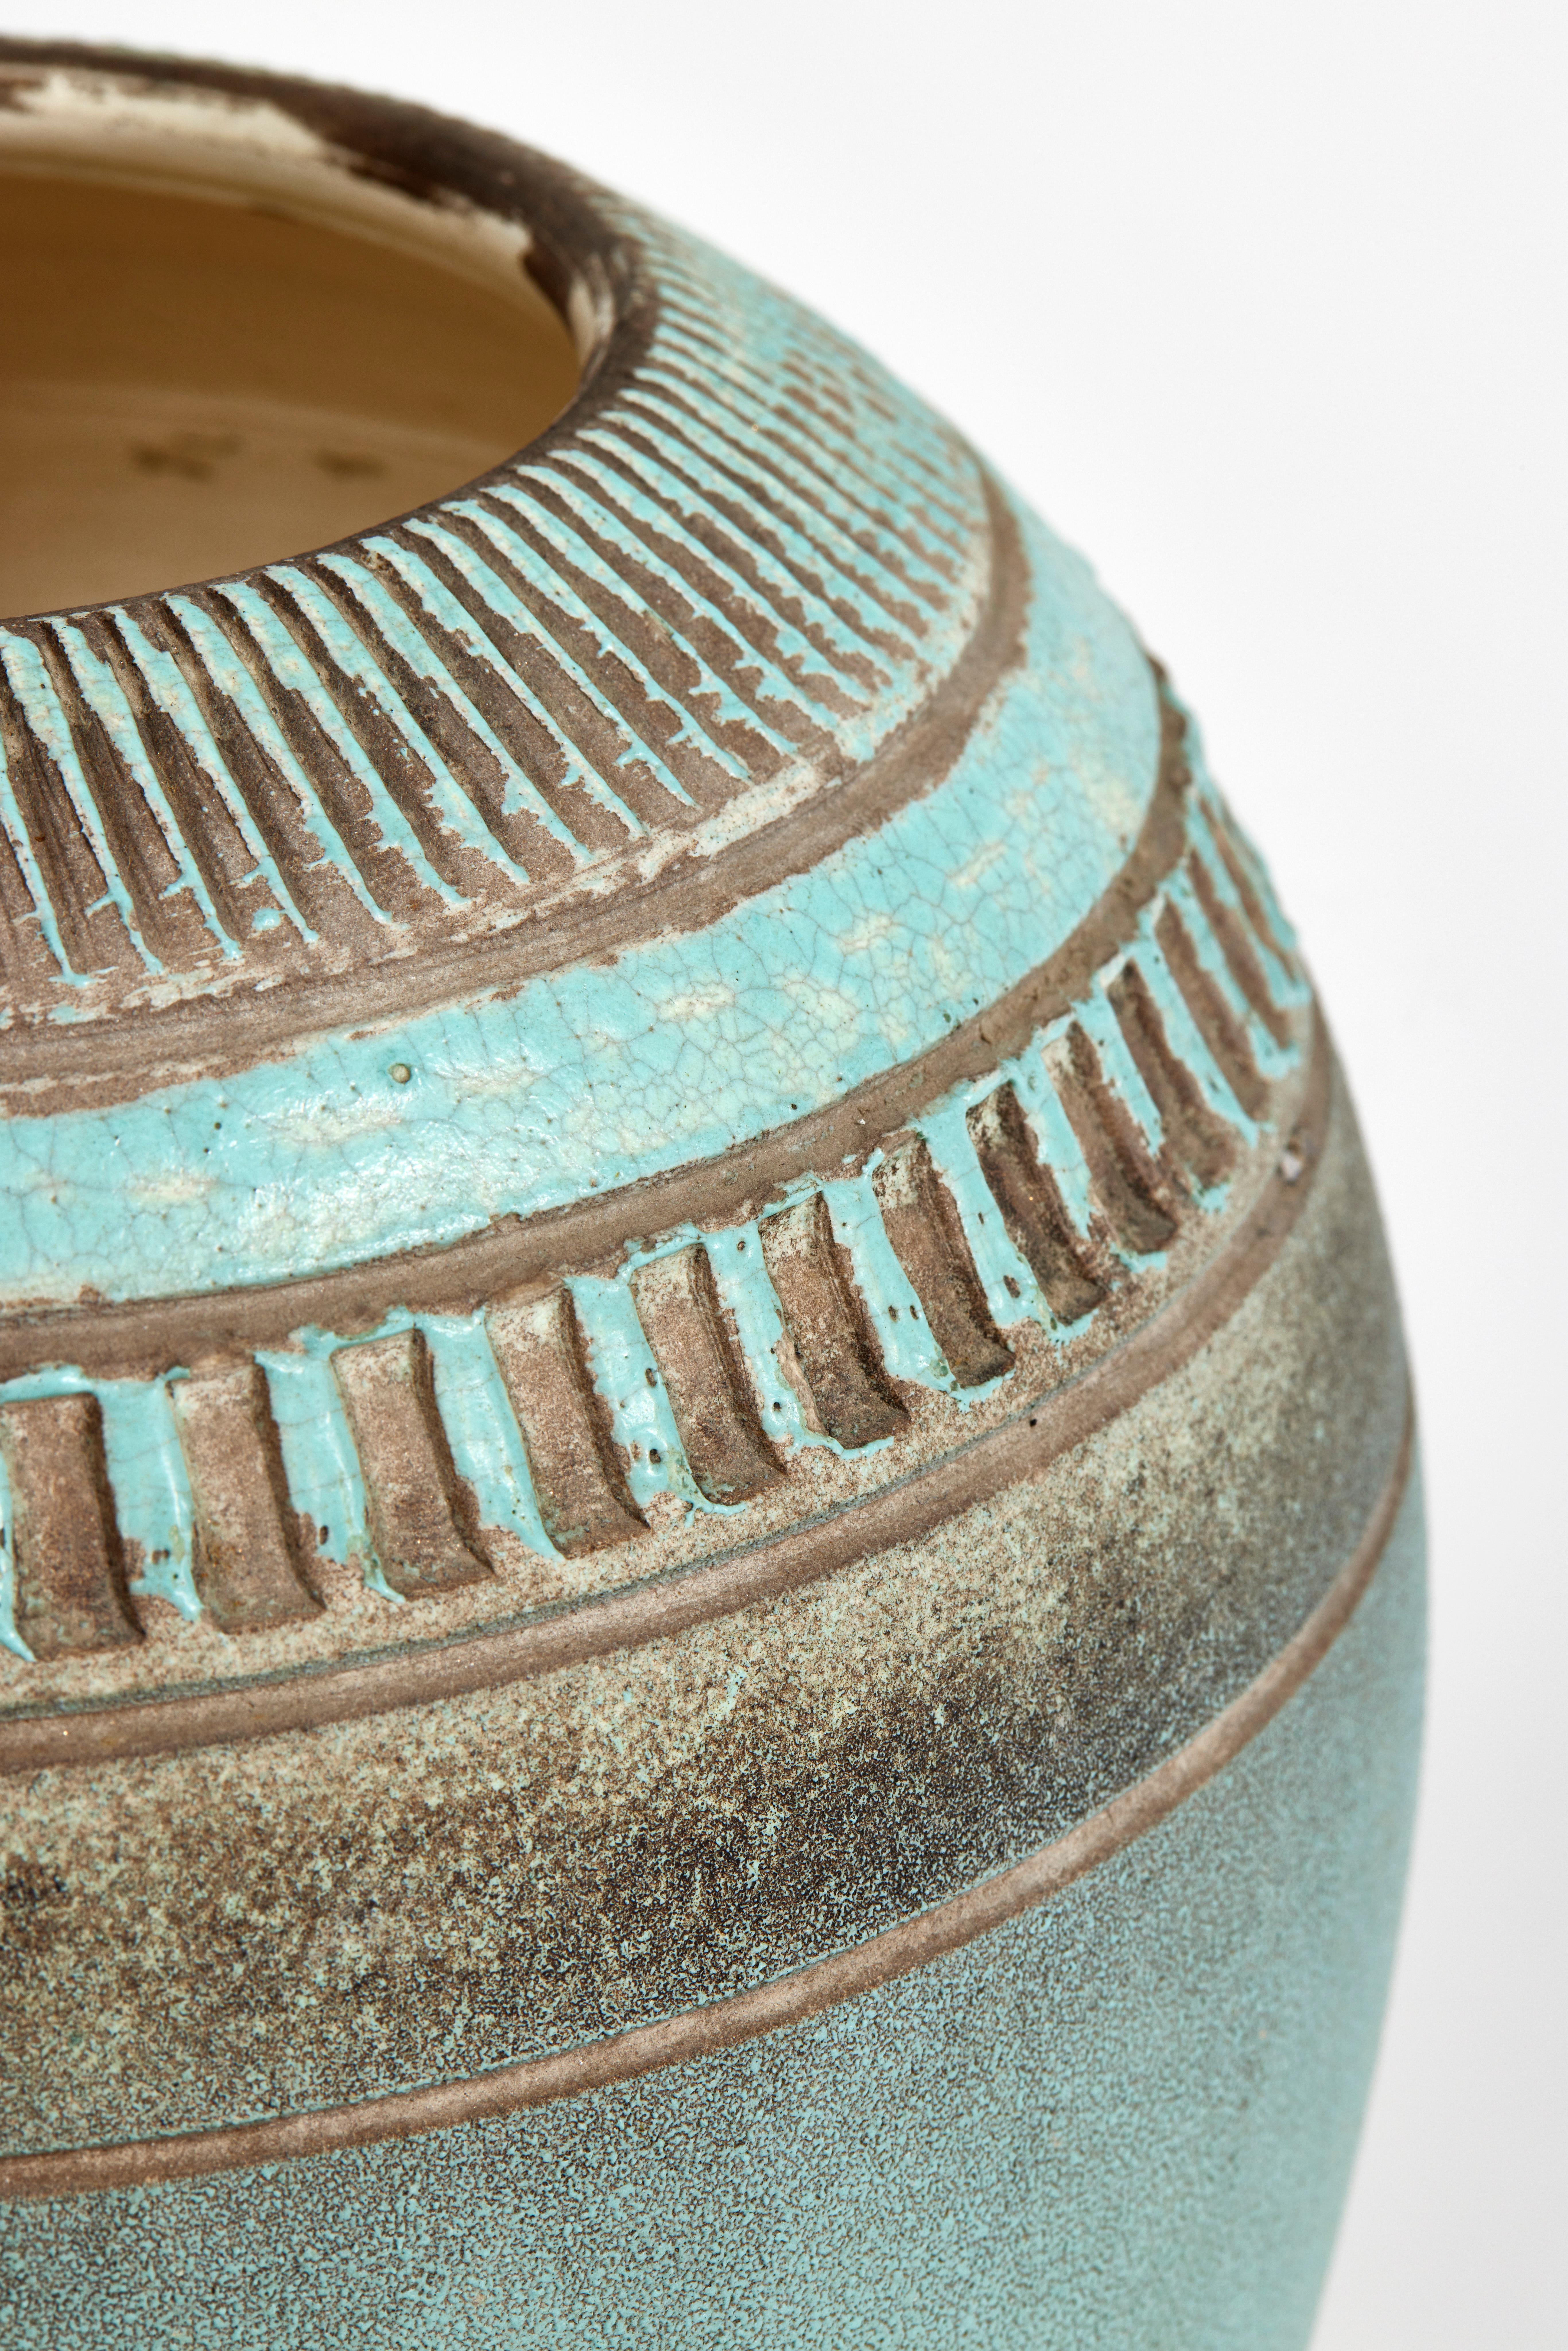 Stoneware ovoid vase by Jean Besnard.
Decorated with radiating vertical bands in hollow, entirely enameled turquoise blue and ochre on cream interior.
Signed at the bottom 